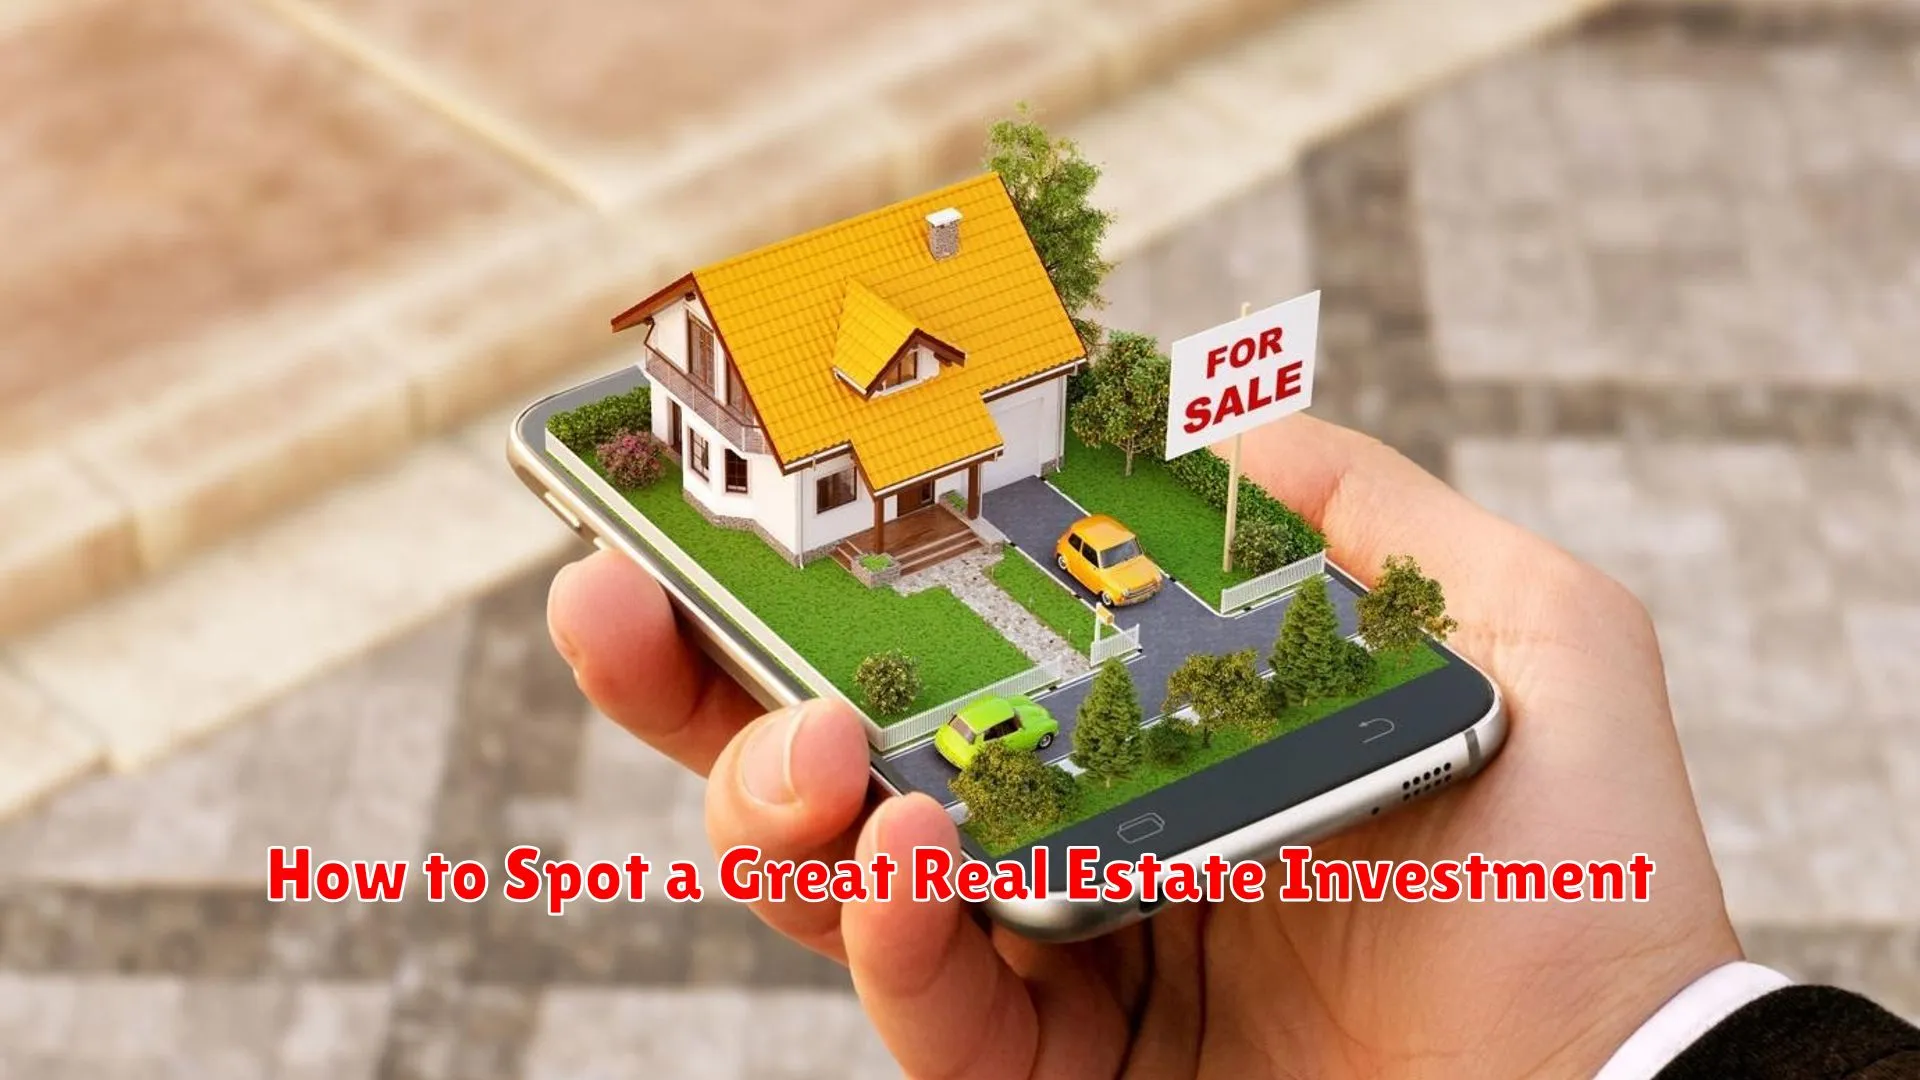 How to Spot a Great Real Estate Investment